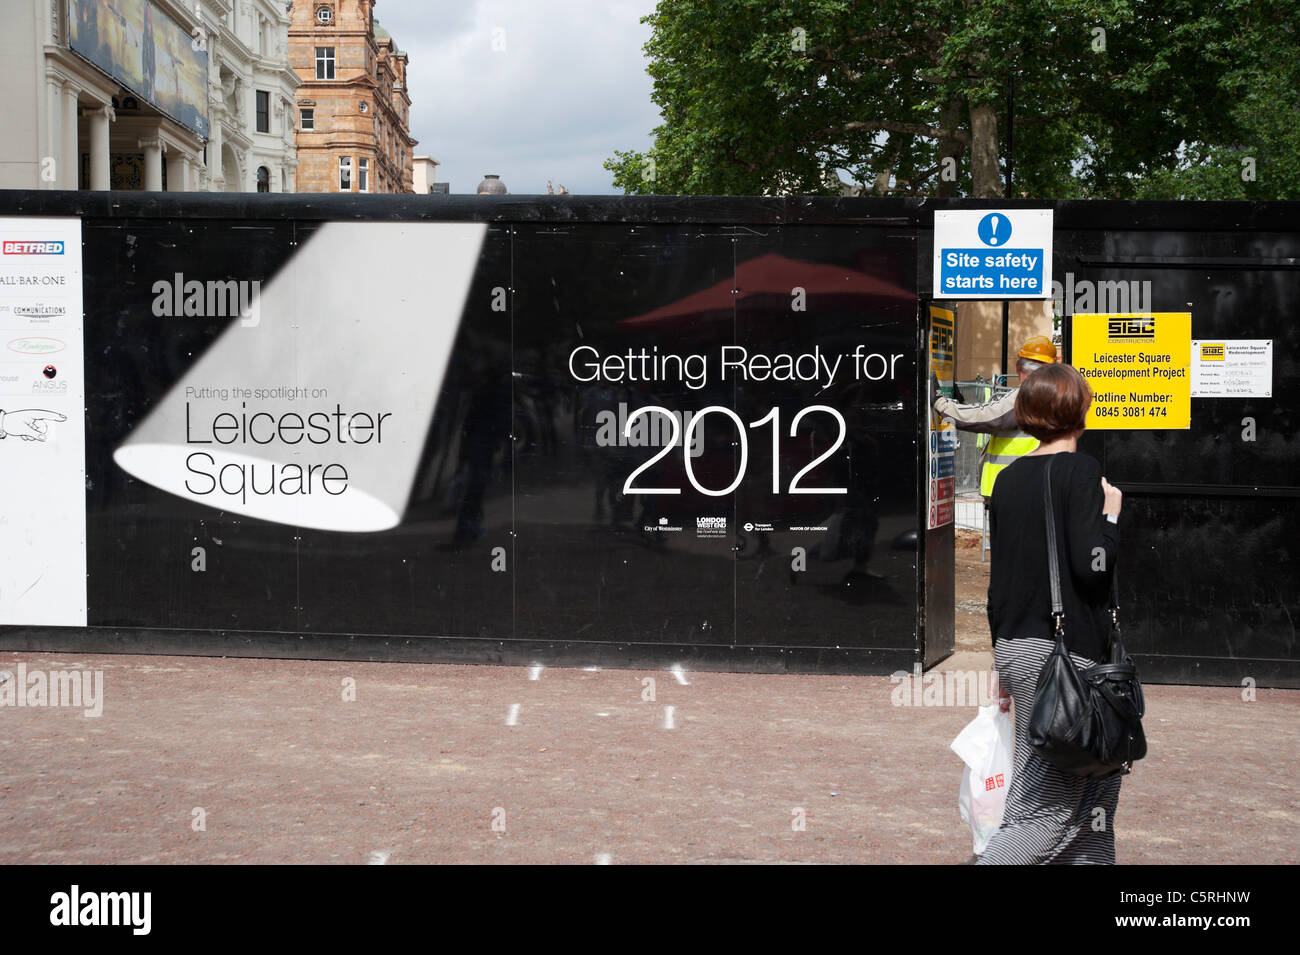 Undergoing refurbishment works on Leicester square, limiting access to it, London, UK. Stock Photo